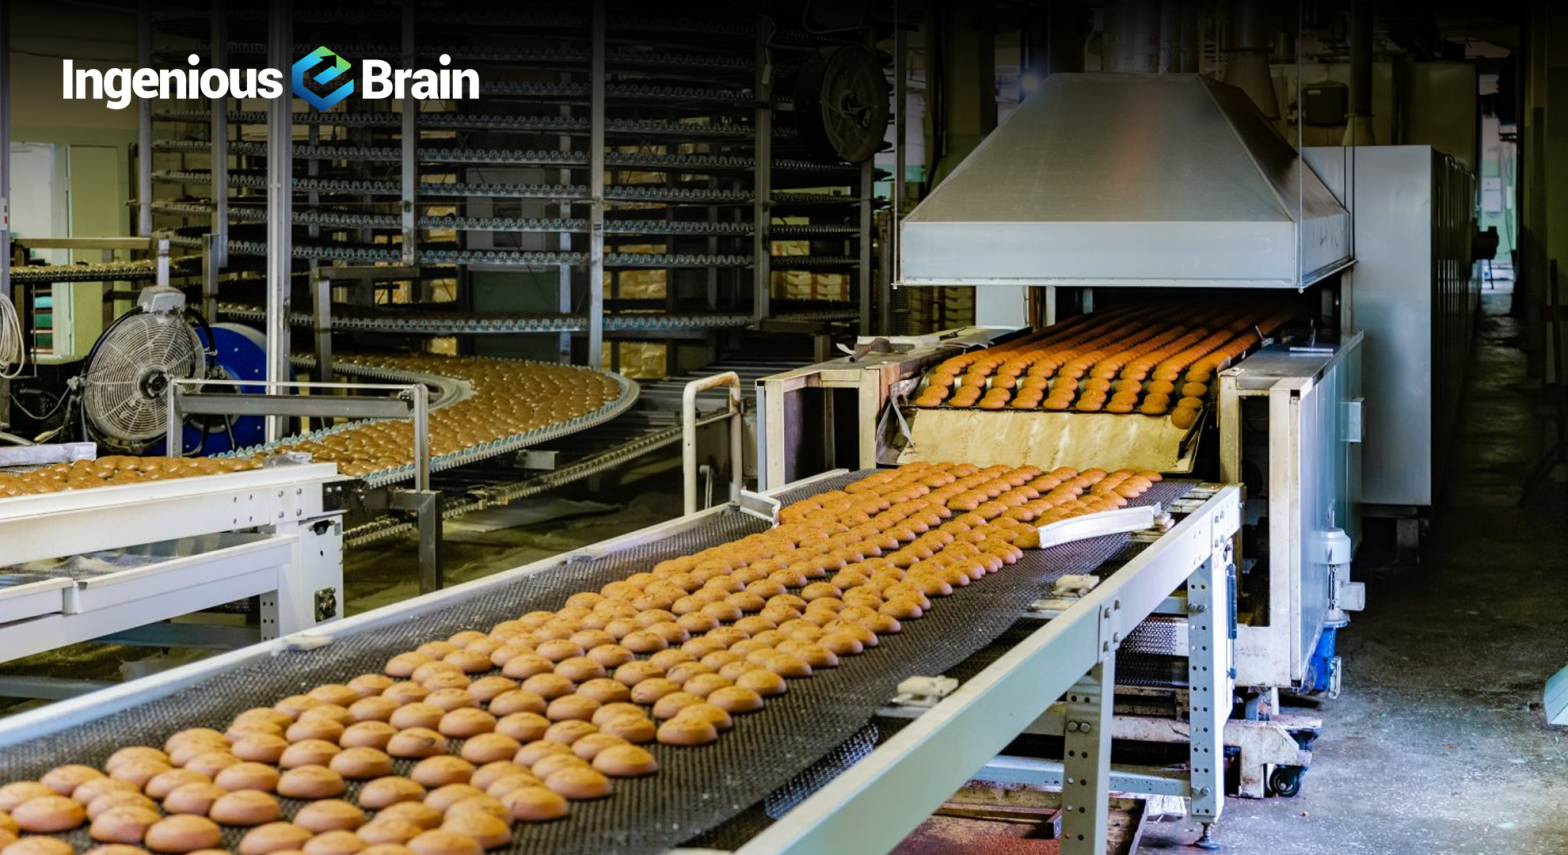 Fillers can Revolutionize Bakery Industry and Confectionery Industry by Substituting Sugar - Ingenious e-Brain